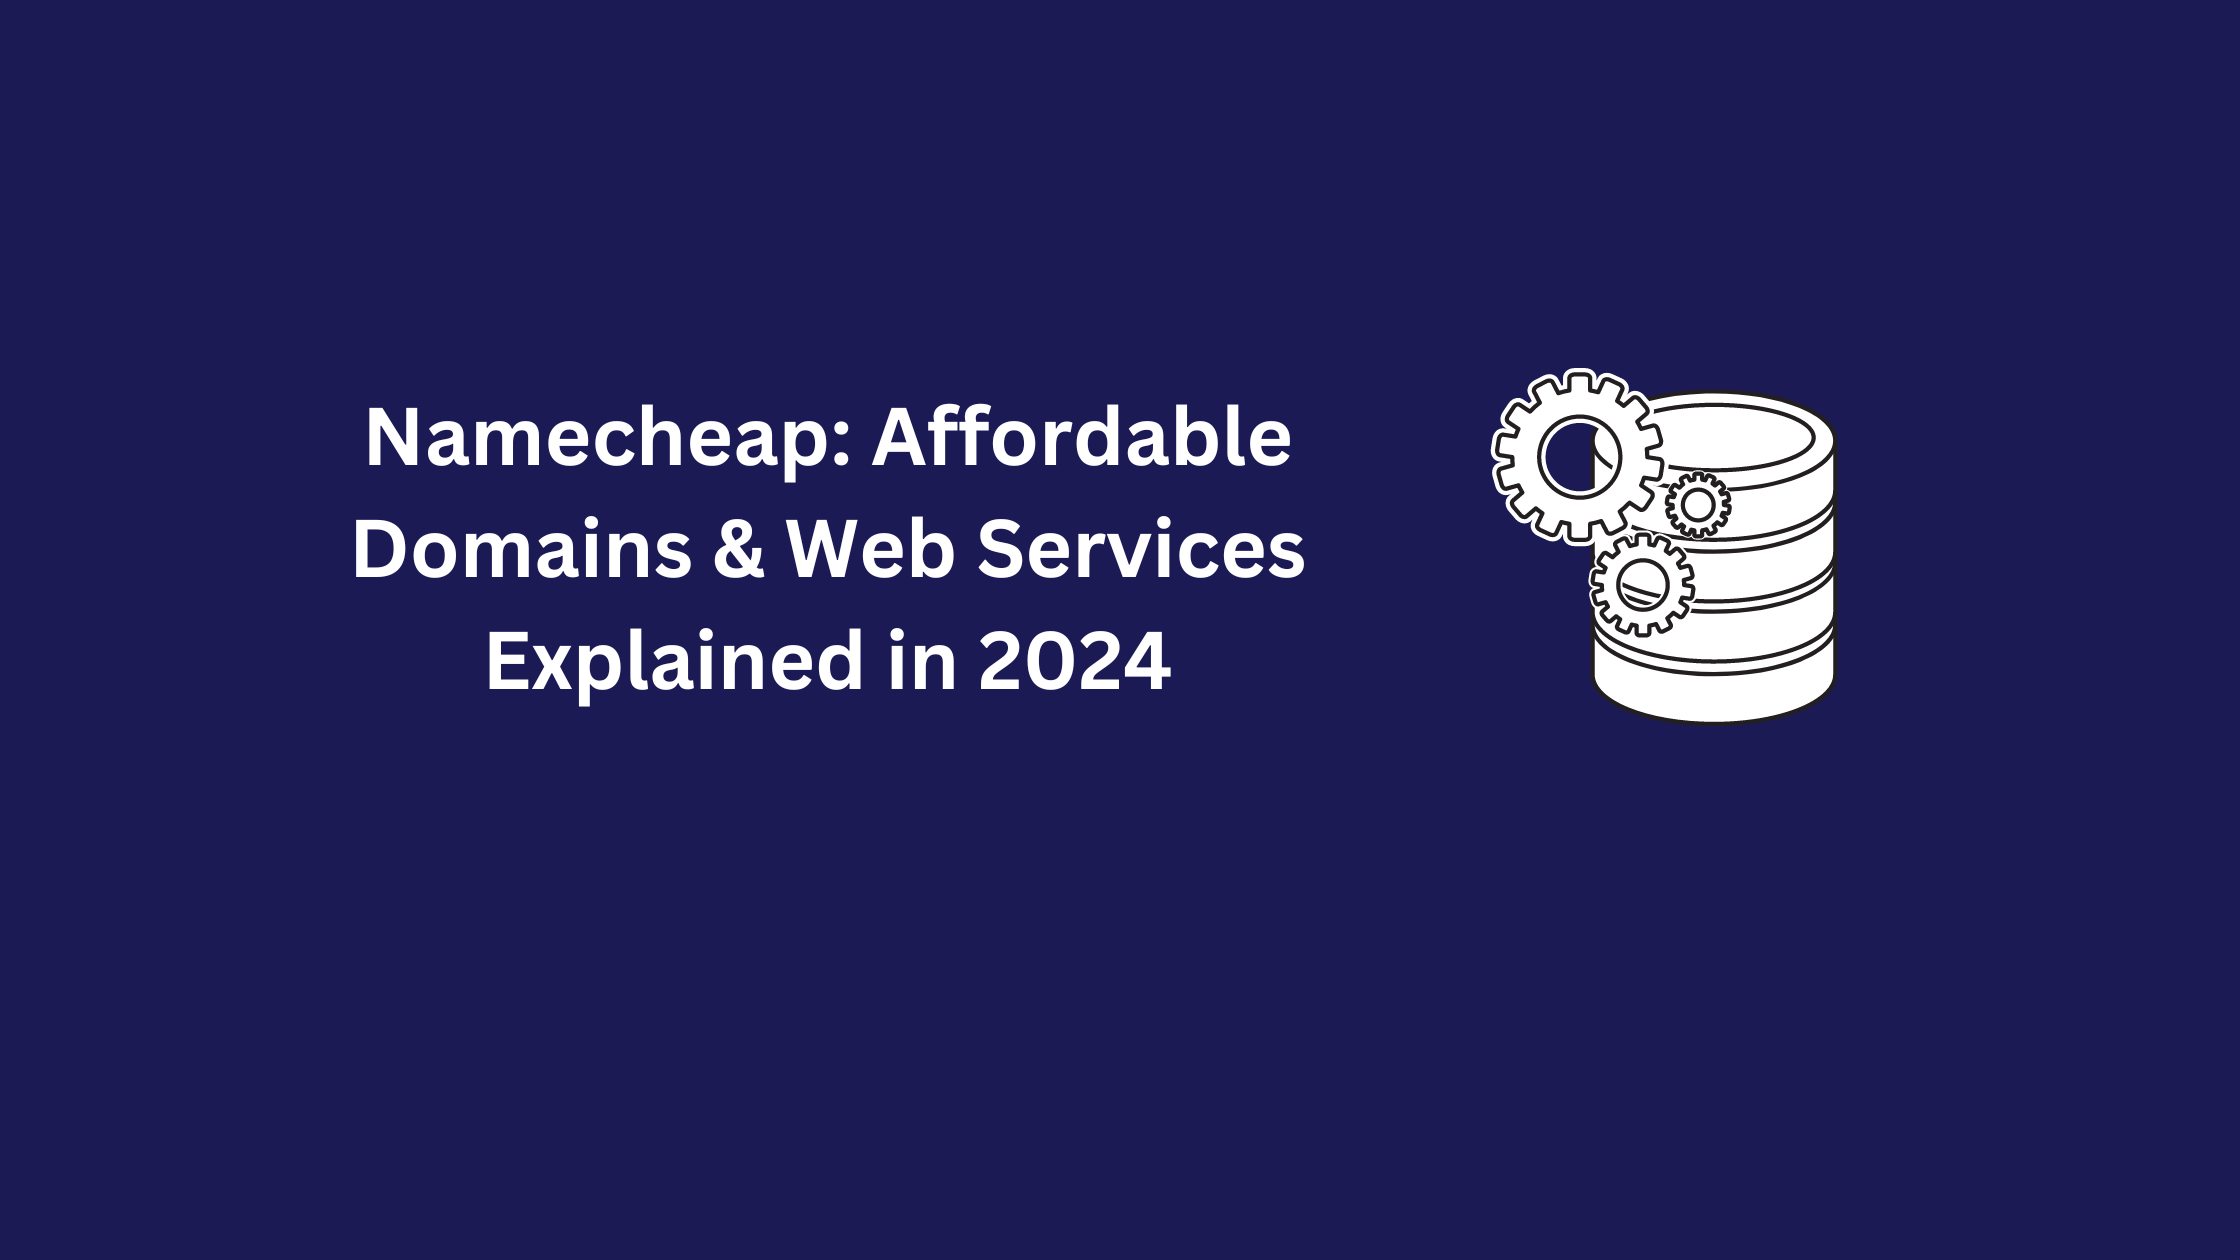 Namecheap: Affordable Domains & Web Services Explained in 2024